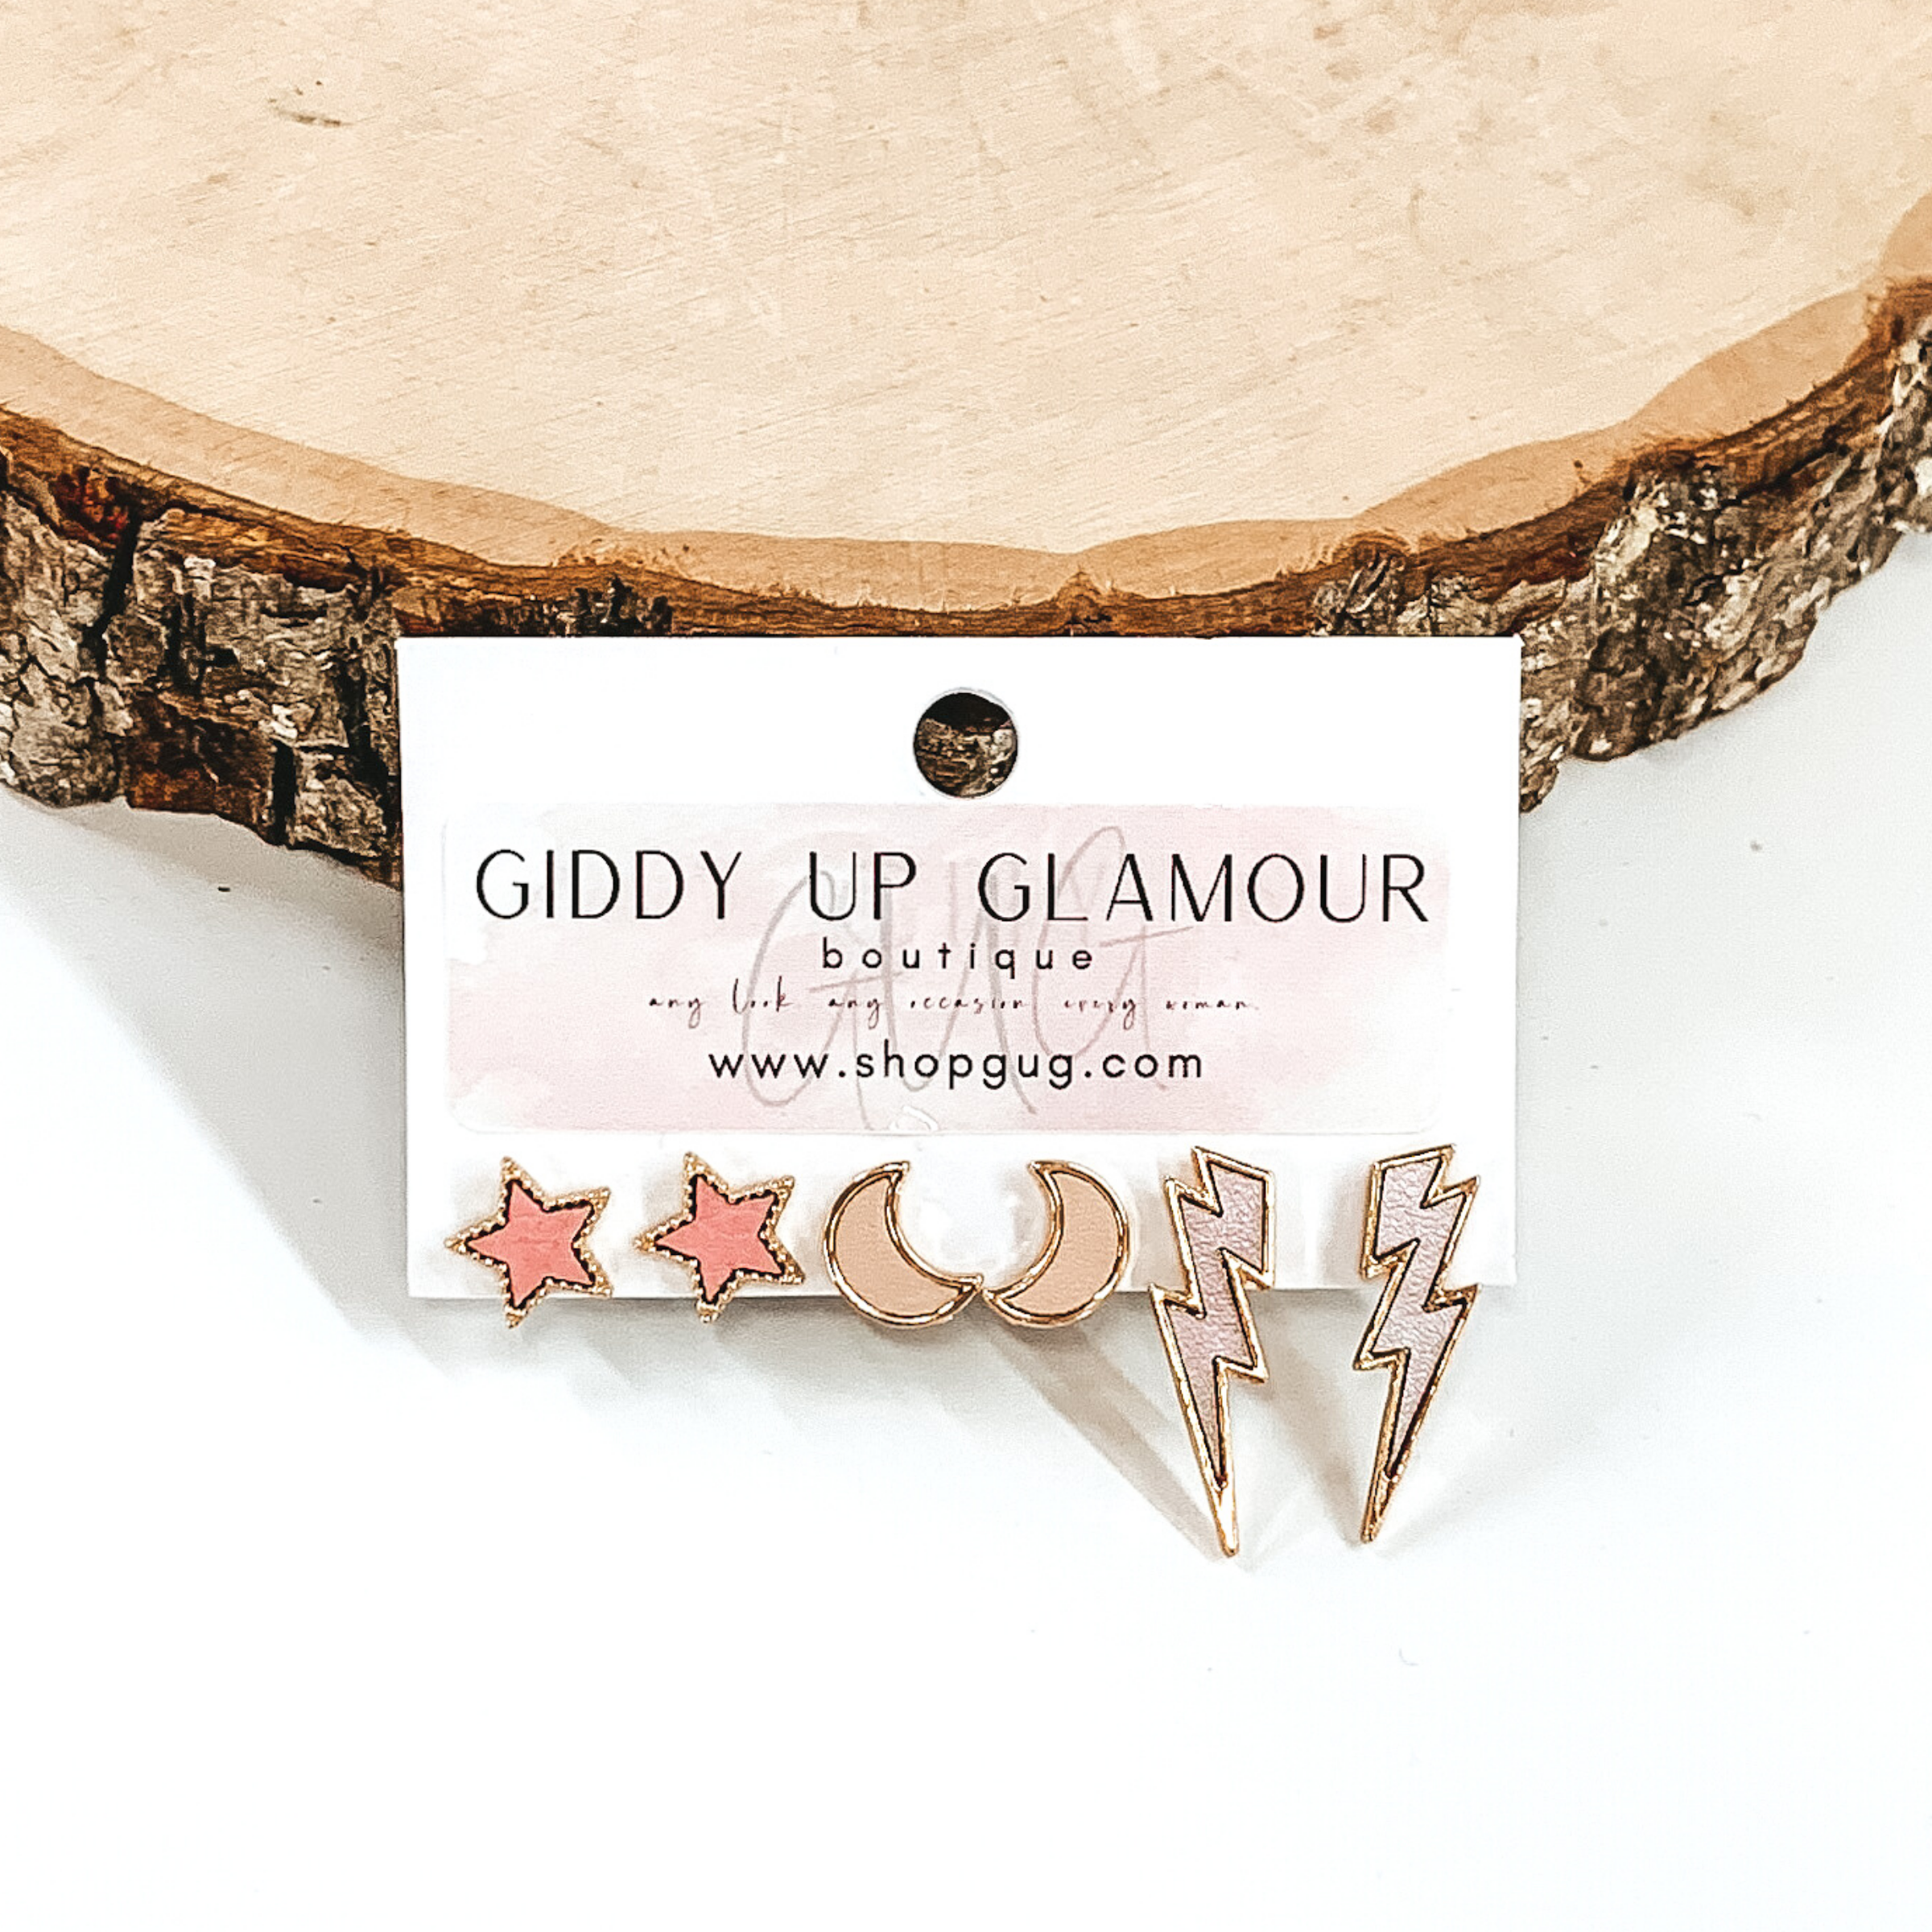 This set includes star studs, half moon studs, and lightning bolt studs. The stars are a light pink color, the moons are a dark pink/ivory color, and the lightning bolts are a light pink/lilac color and all are outline in gold. This earring set is pictured on a white earrings holder in front of a piece of wood on a white background.